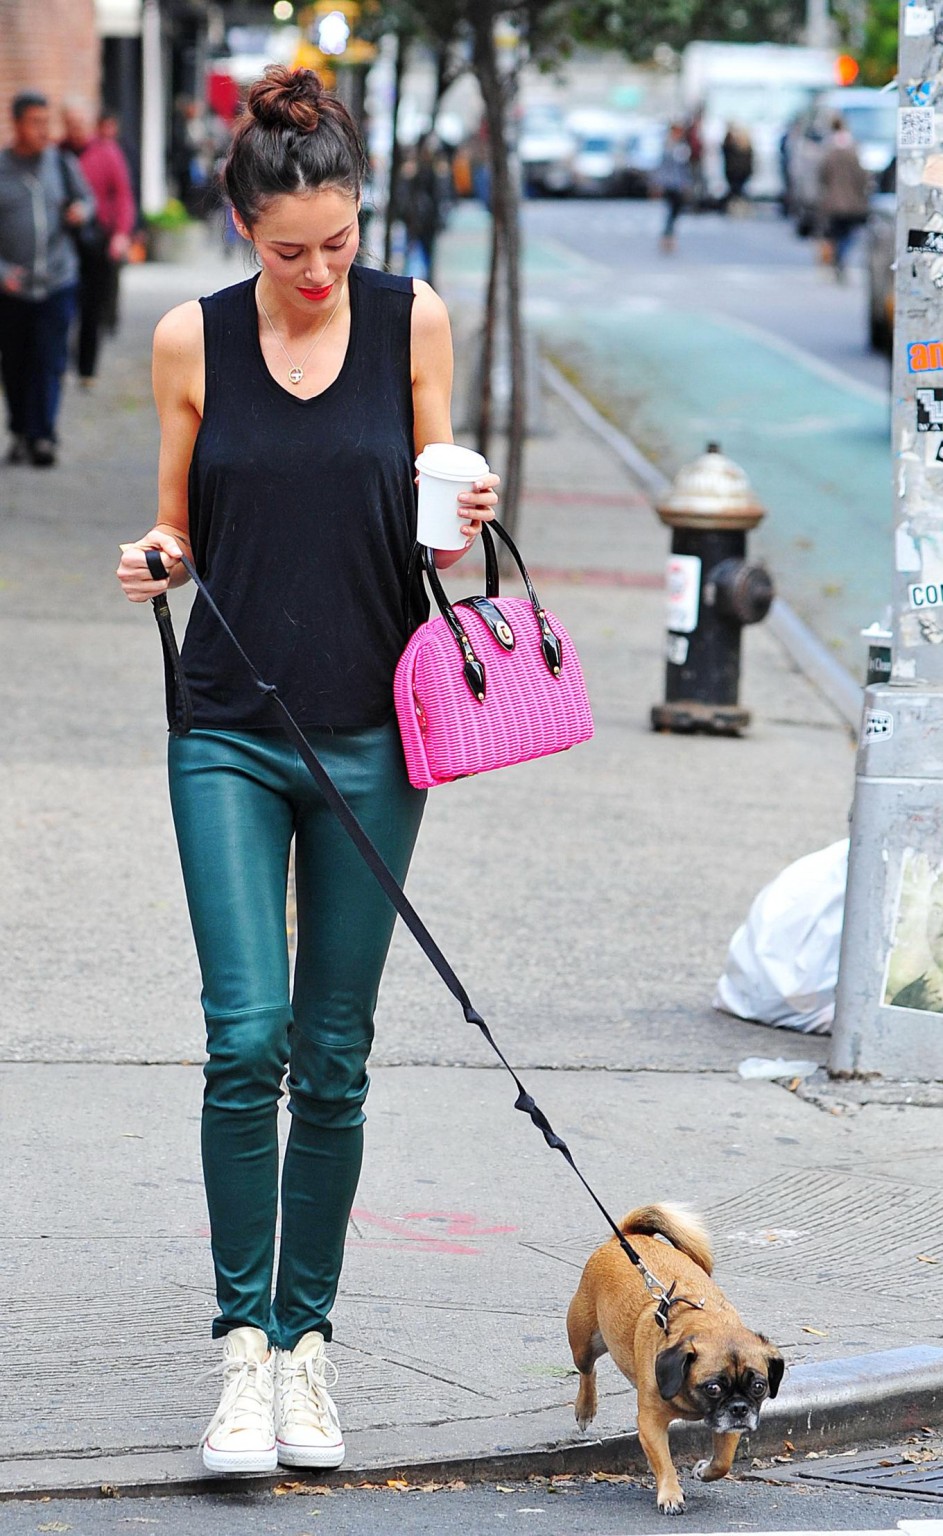 Nicole Trunfio bra peak while petting her doggy out in Soho #75250630